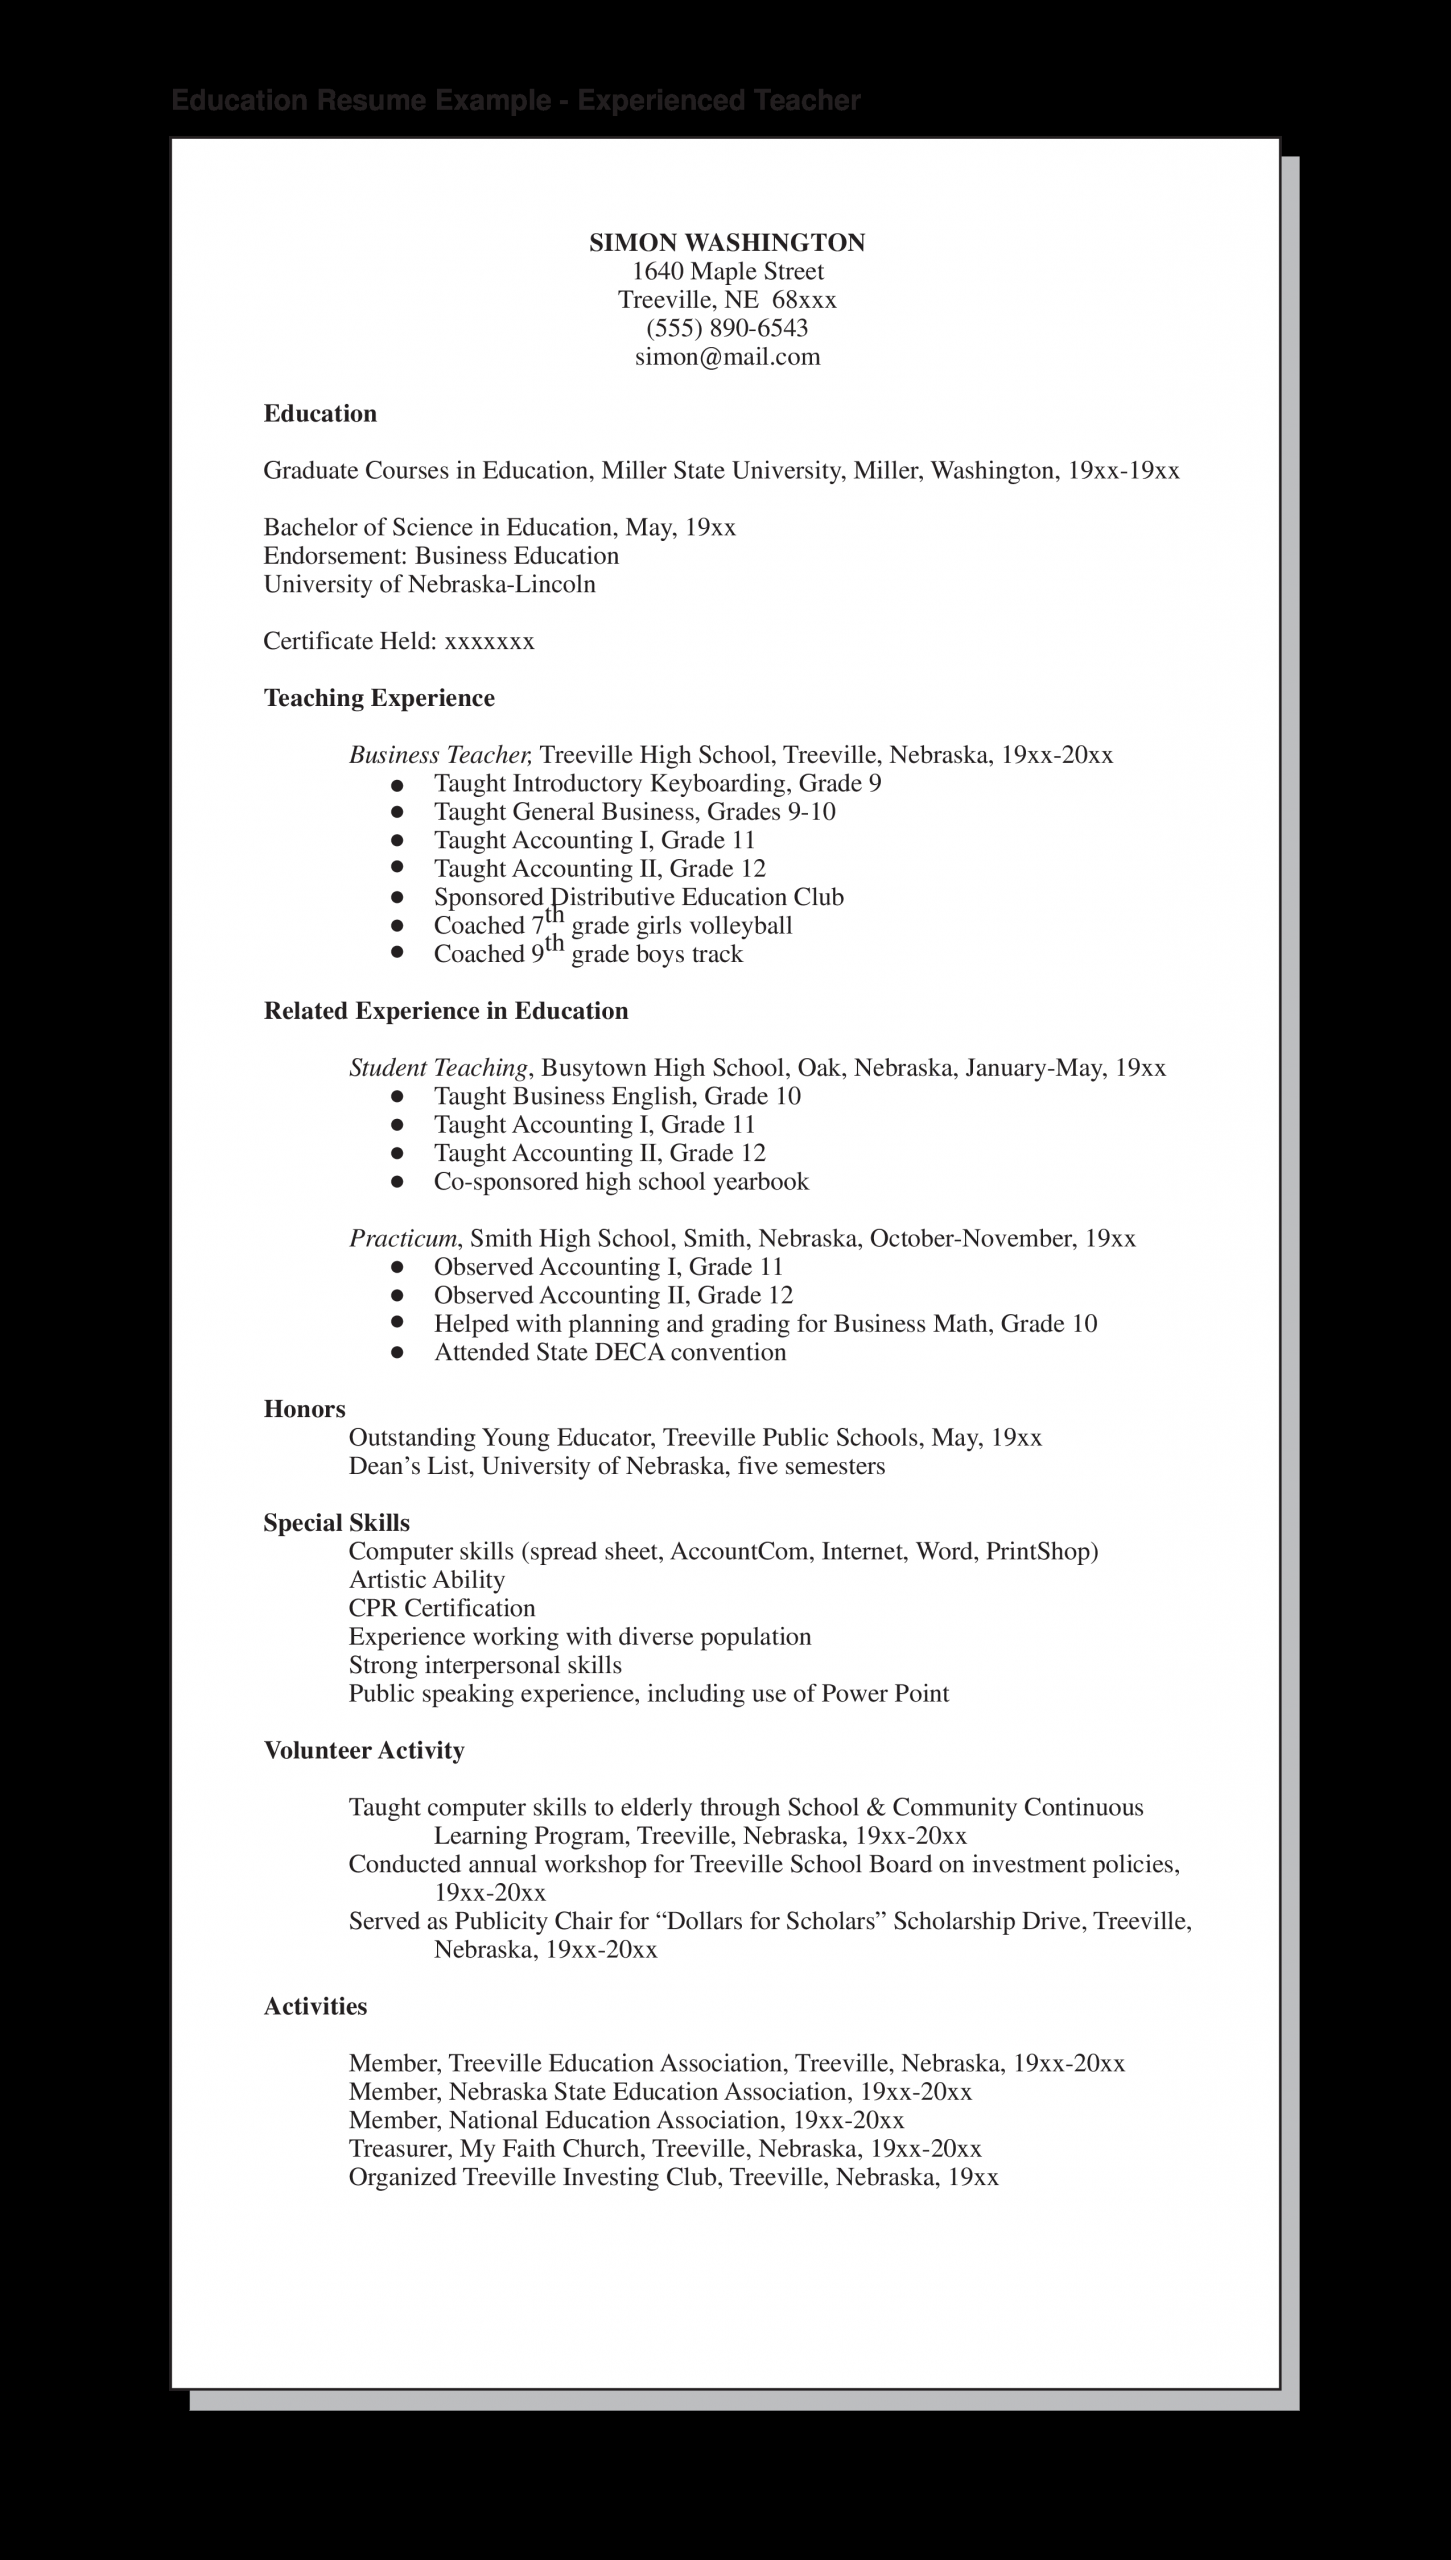 Sample Experienced Teacher Resume Templates At inside measurements 2550 X 4500